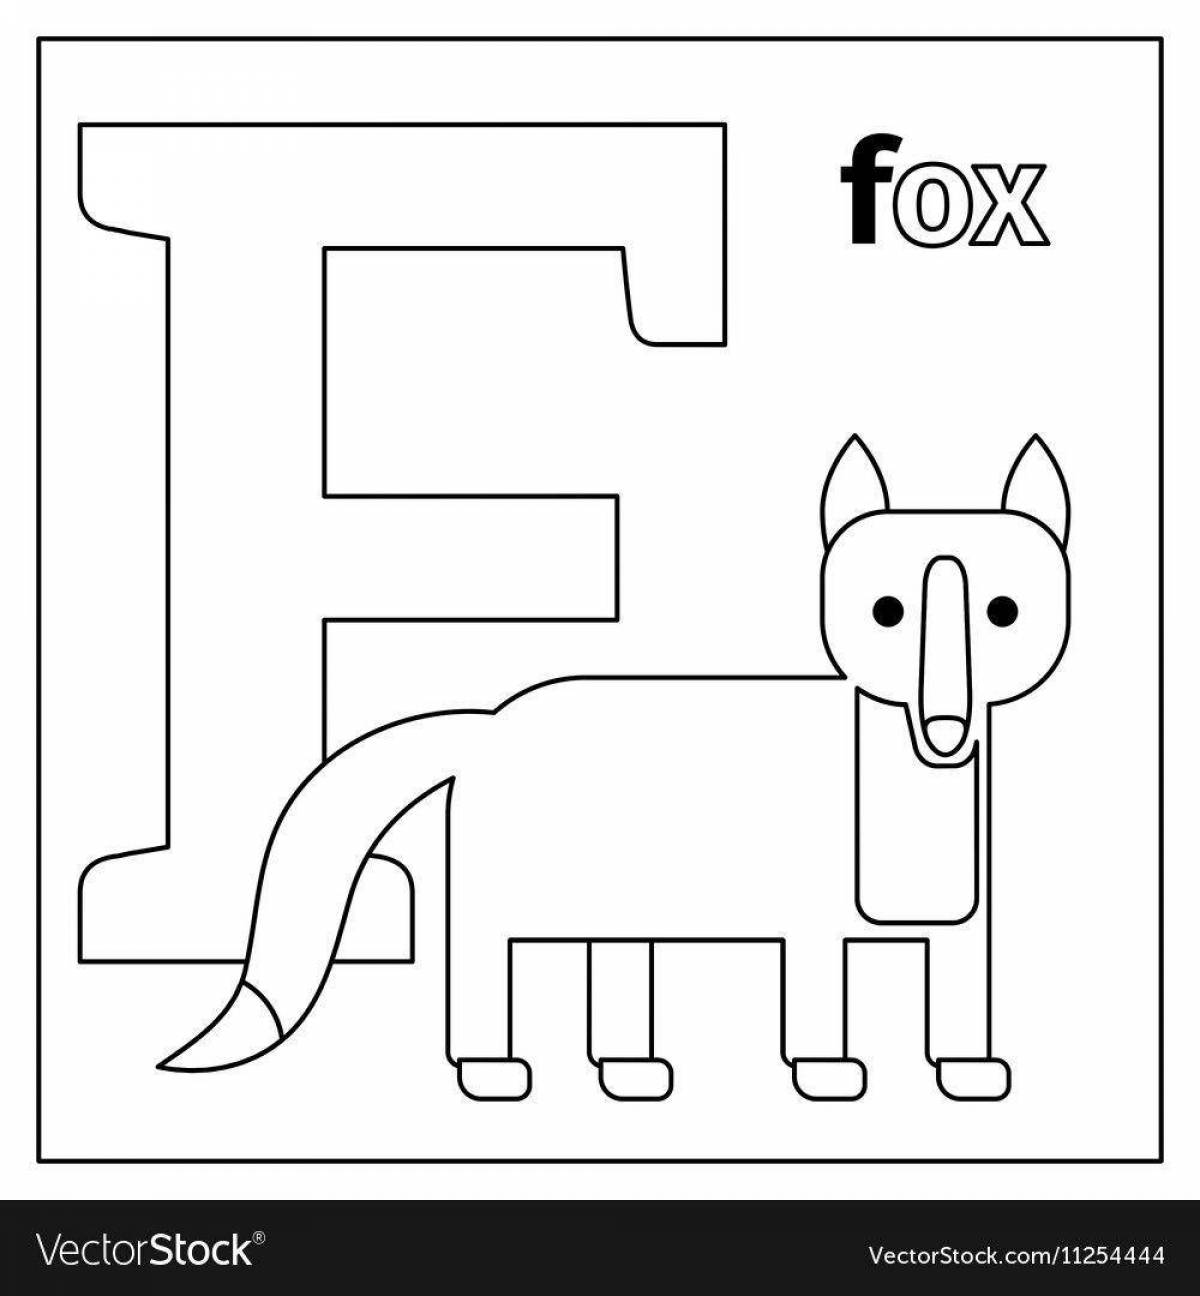 Attractive letter f coloring book